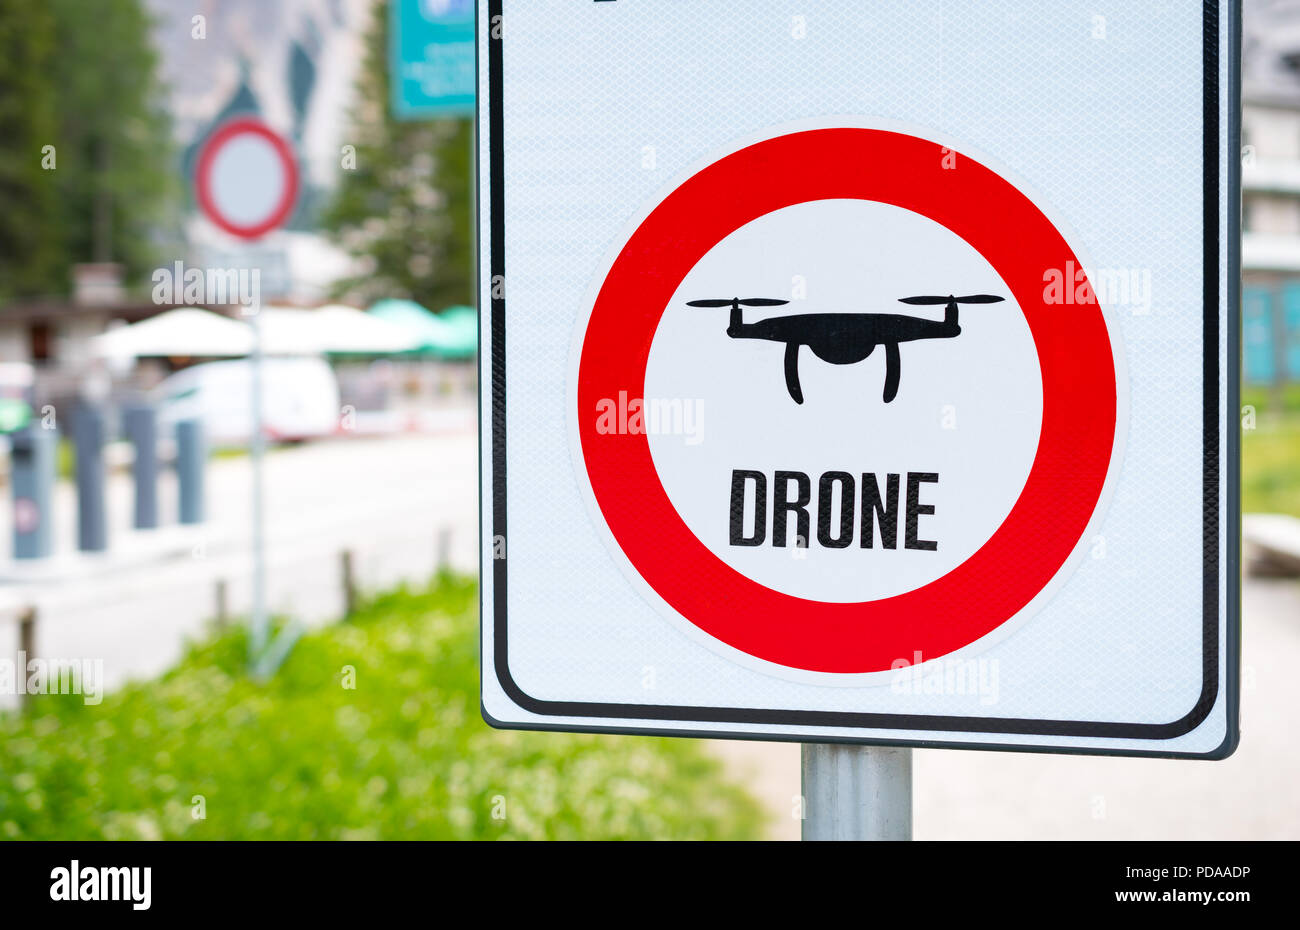 No drones allowed sign in front of private property Stock Photo